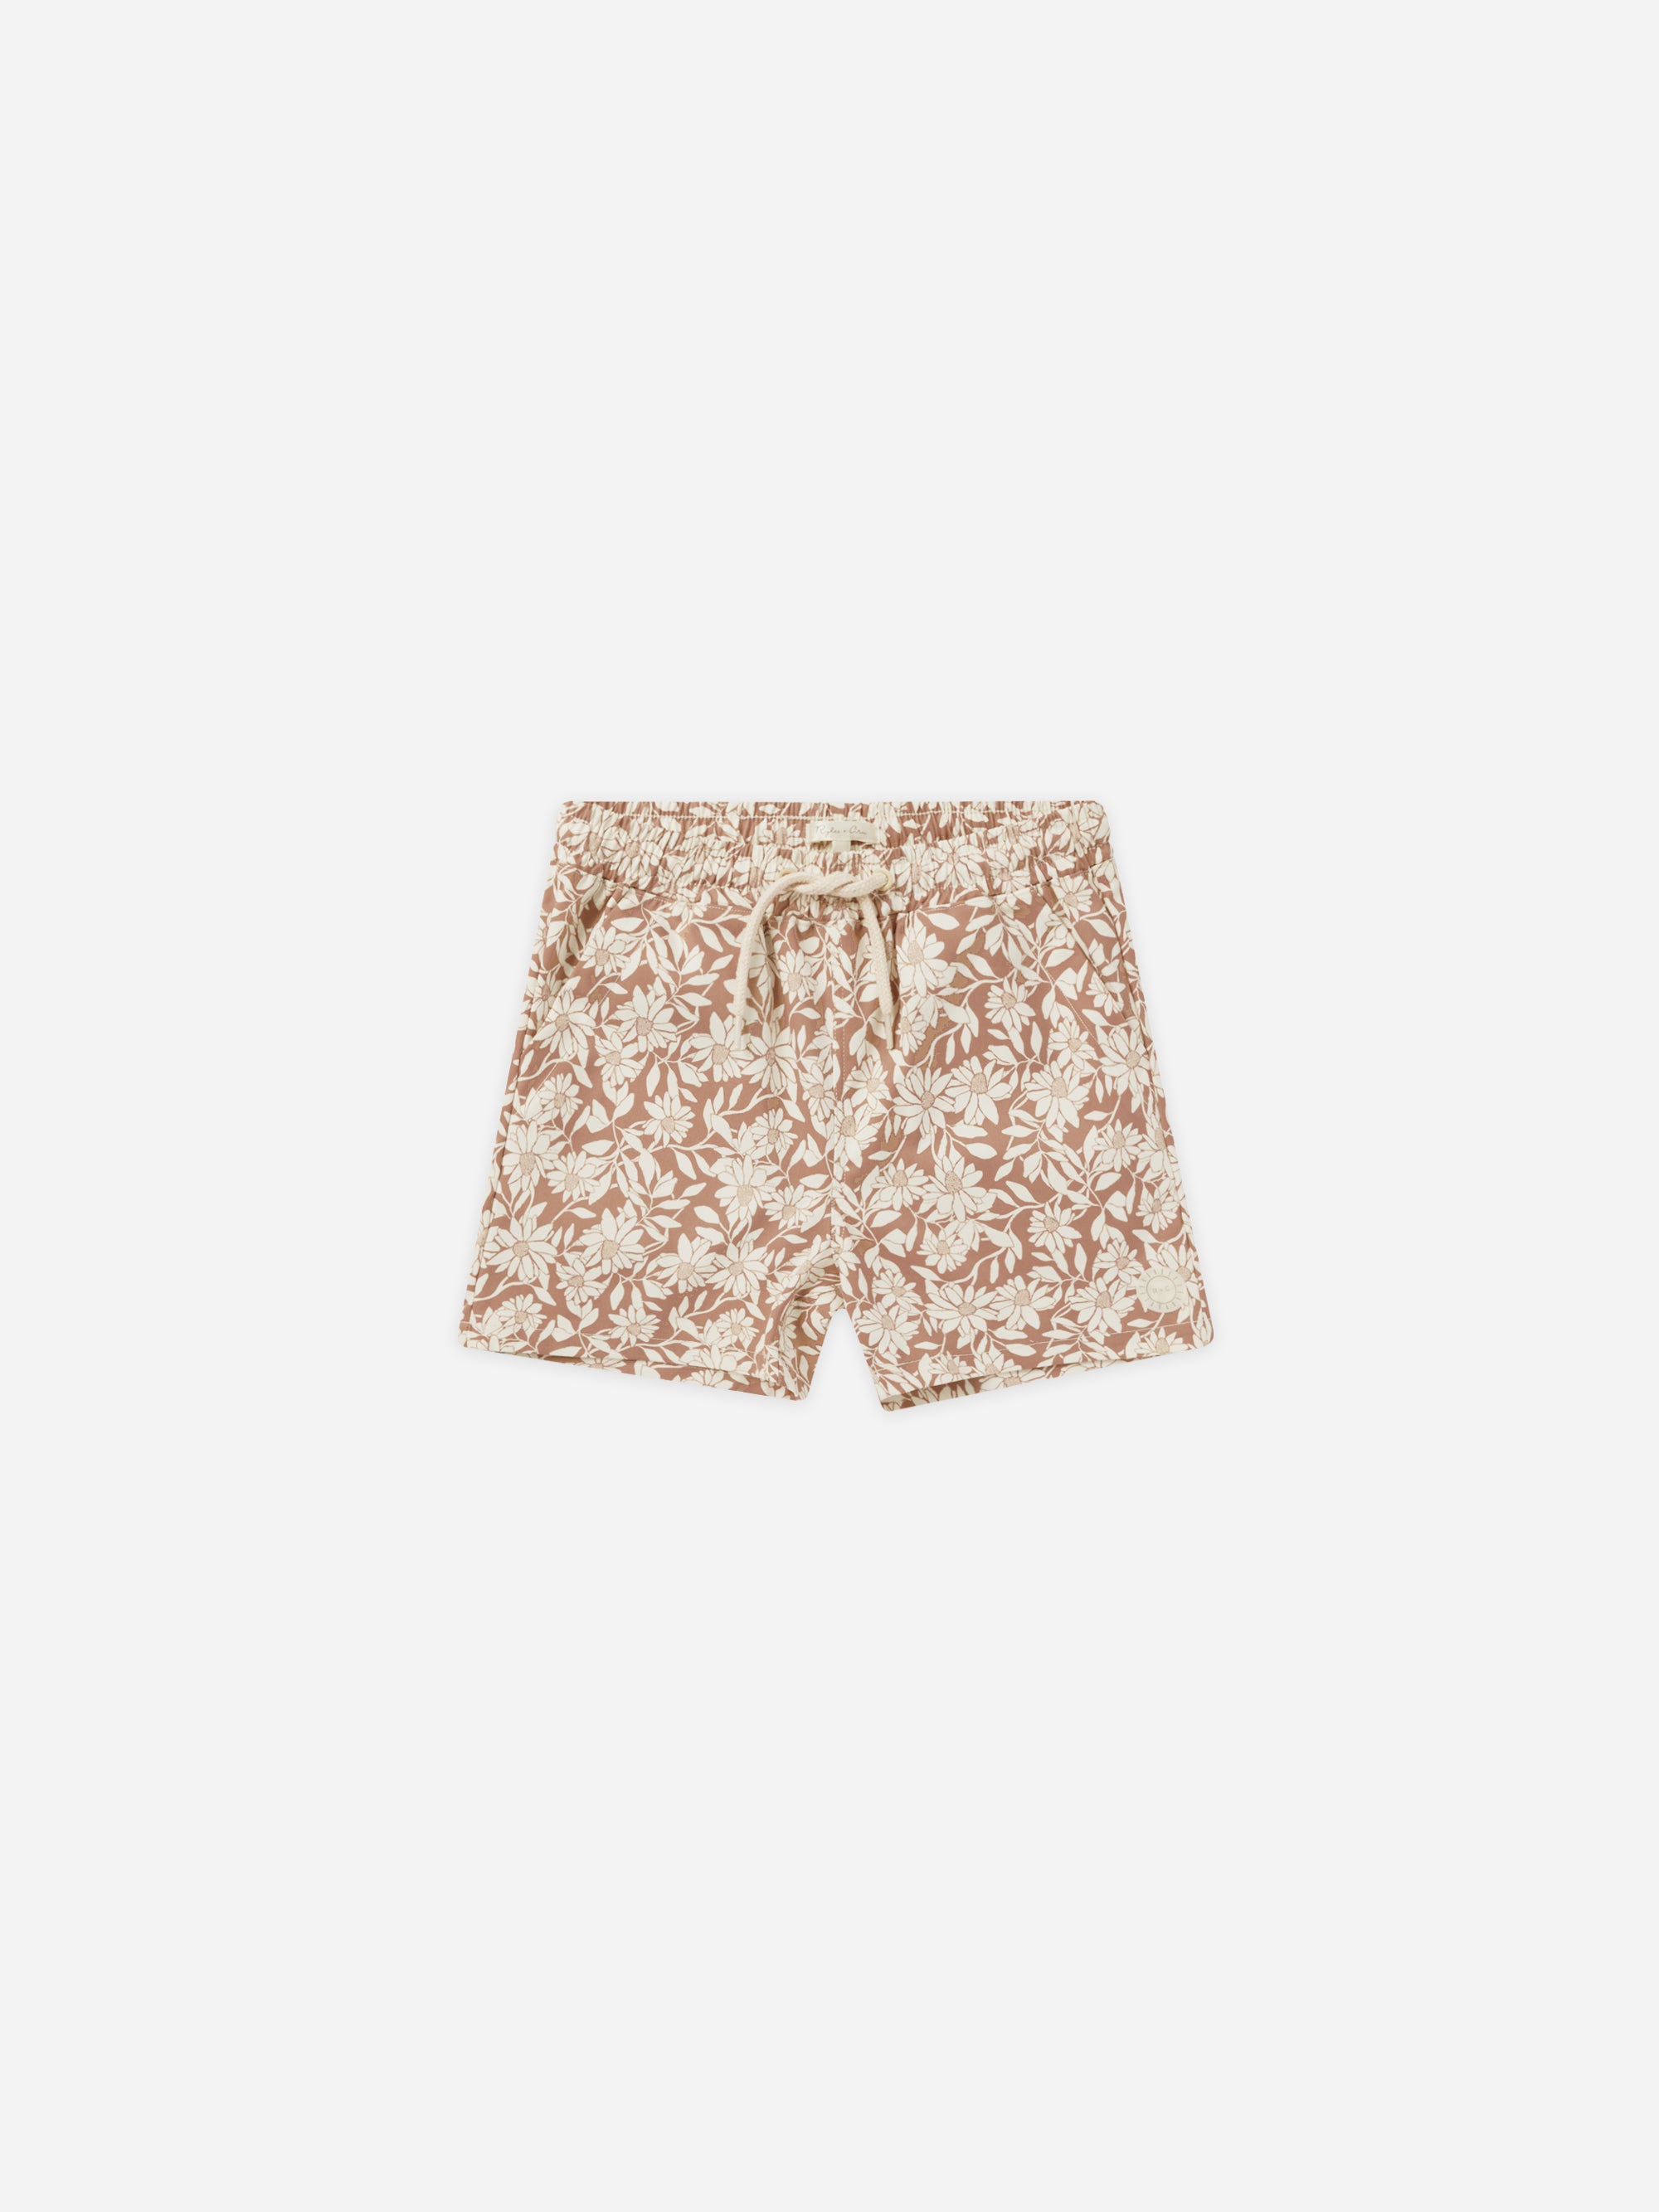 Boardshort || Plumeria - Rylee + Cru | Kids Clothes | Trendy Baby Clothes | Modern Infant Outfits |